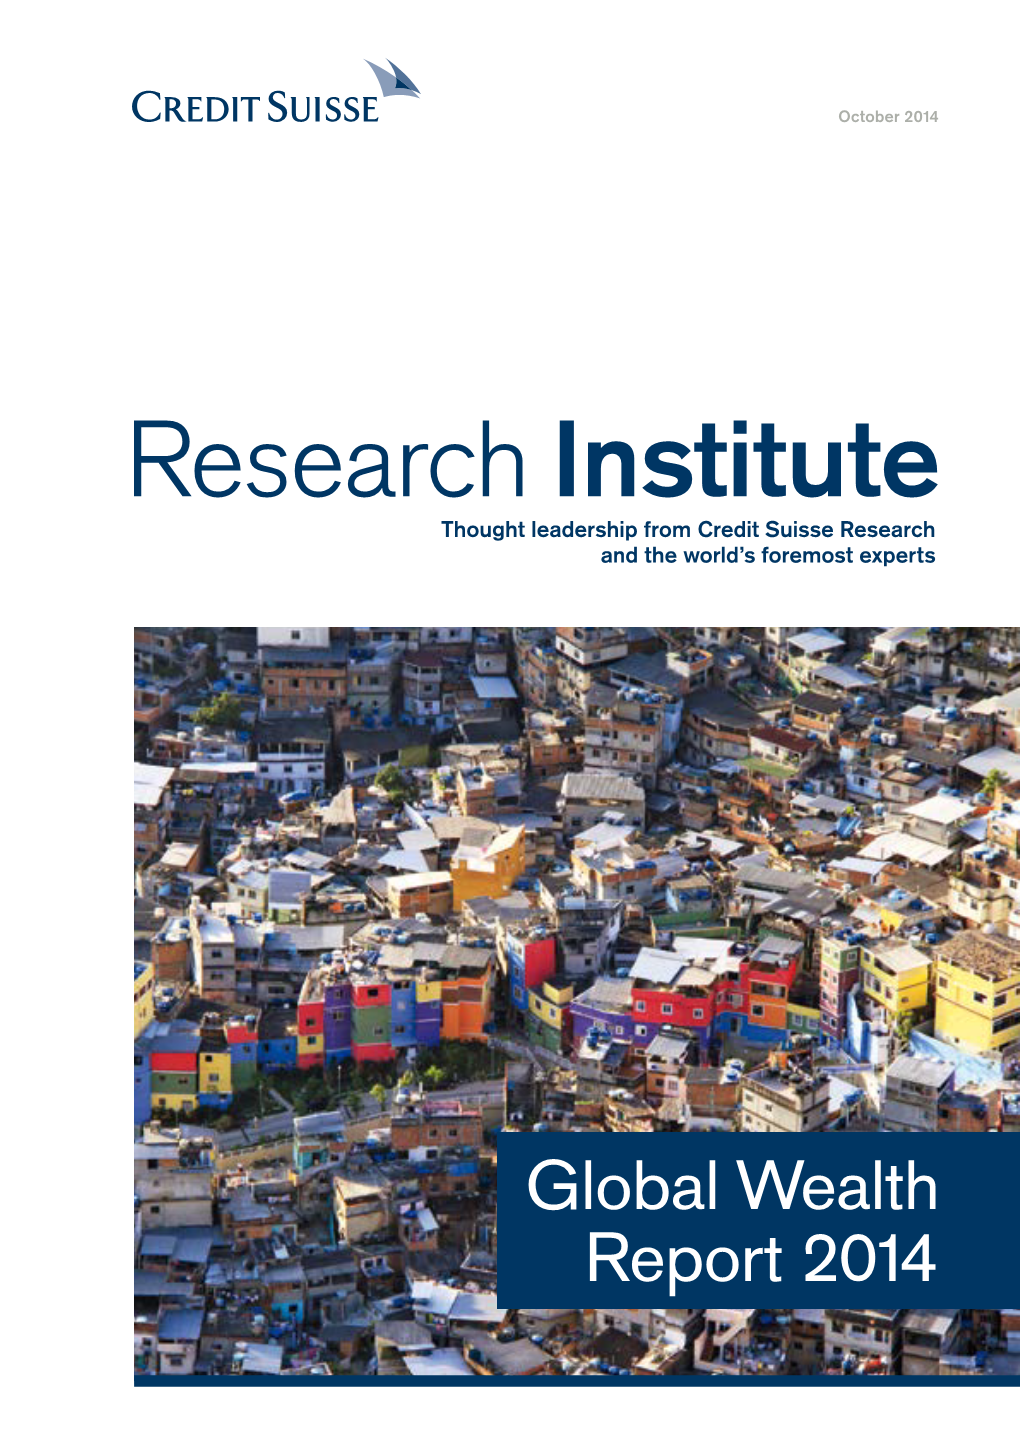 Global Wealth Report 2014 G 45 28 23 14 38 04 03 Contents